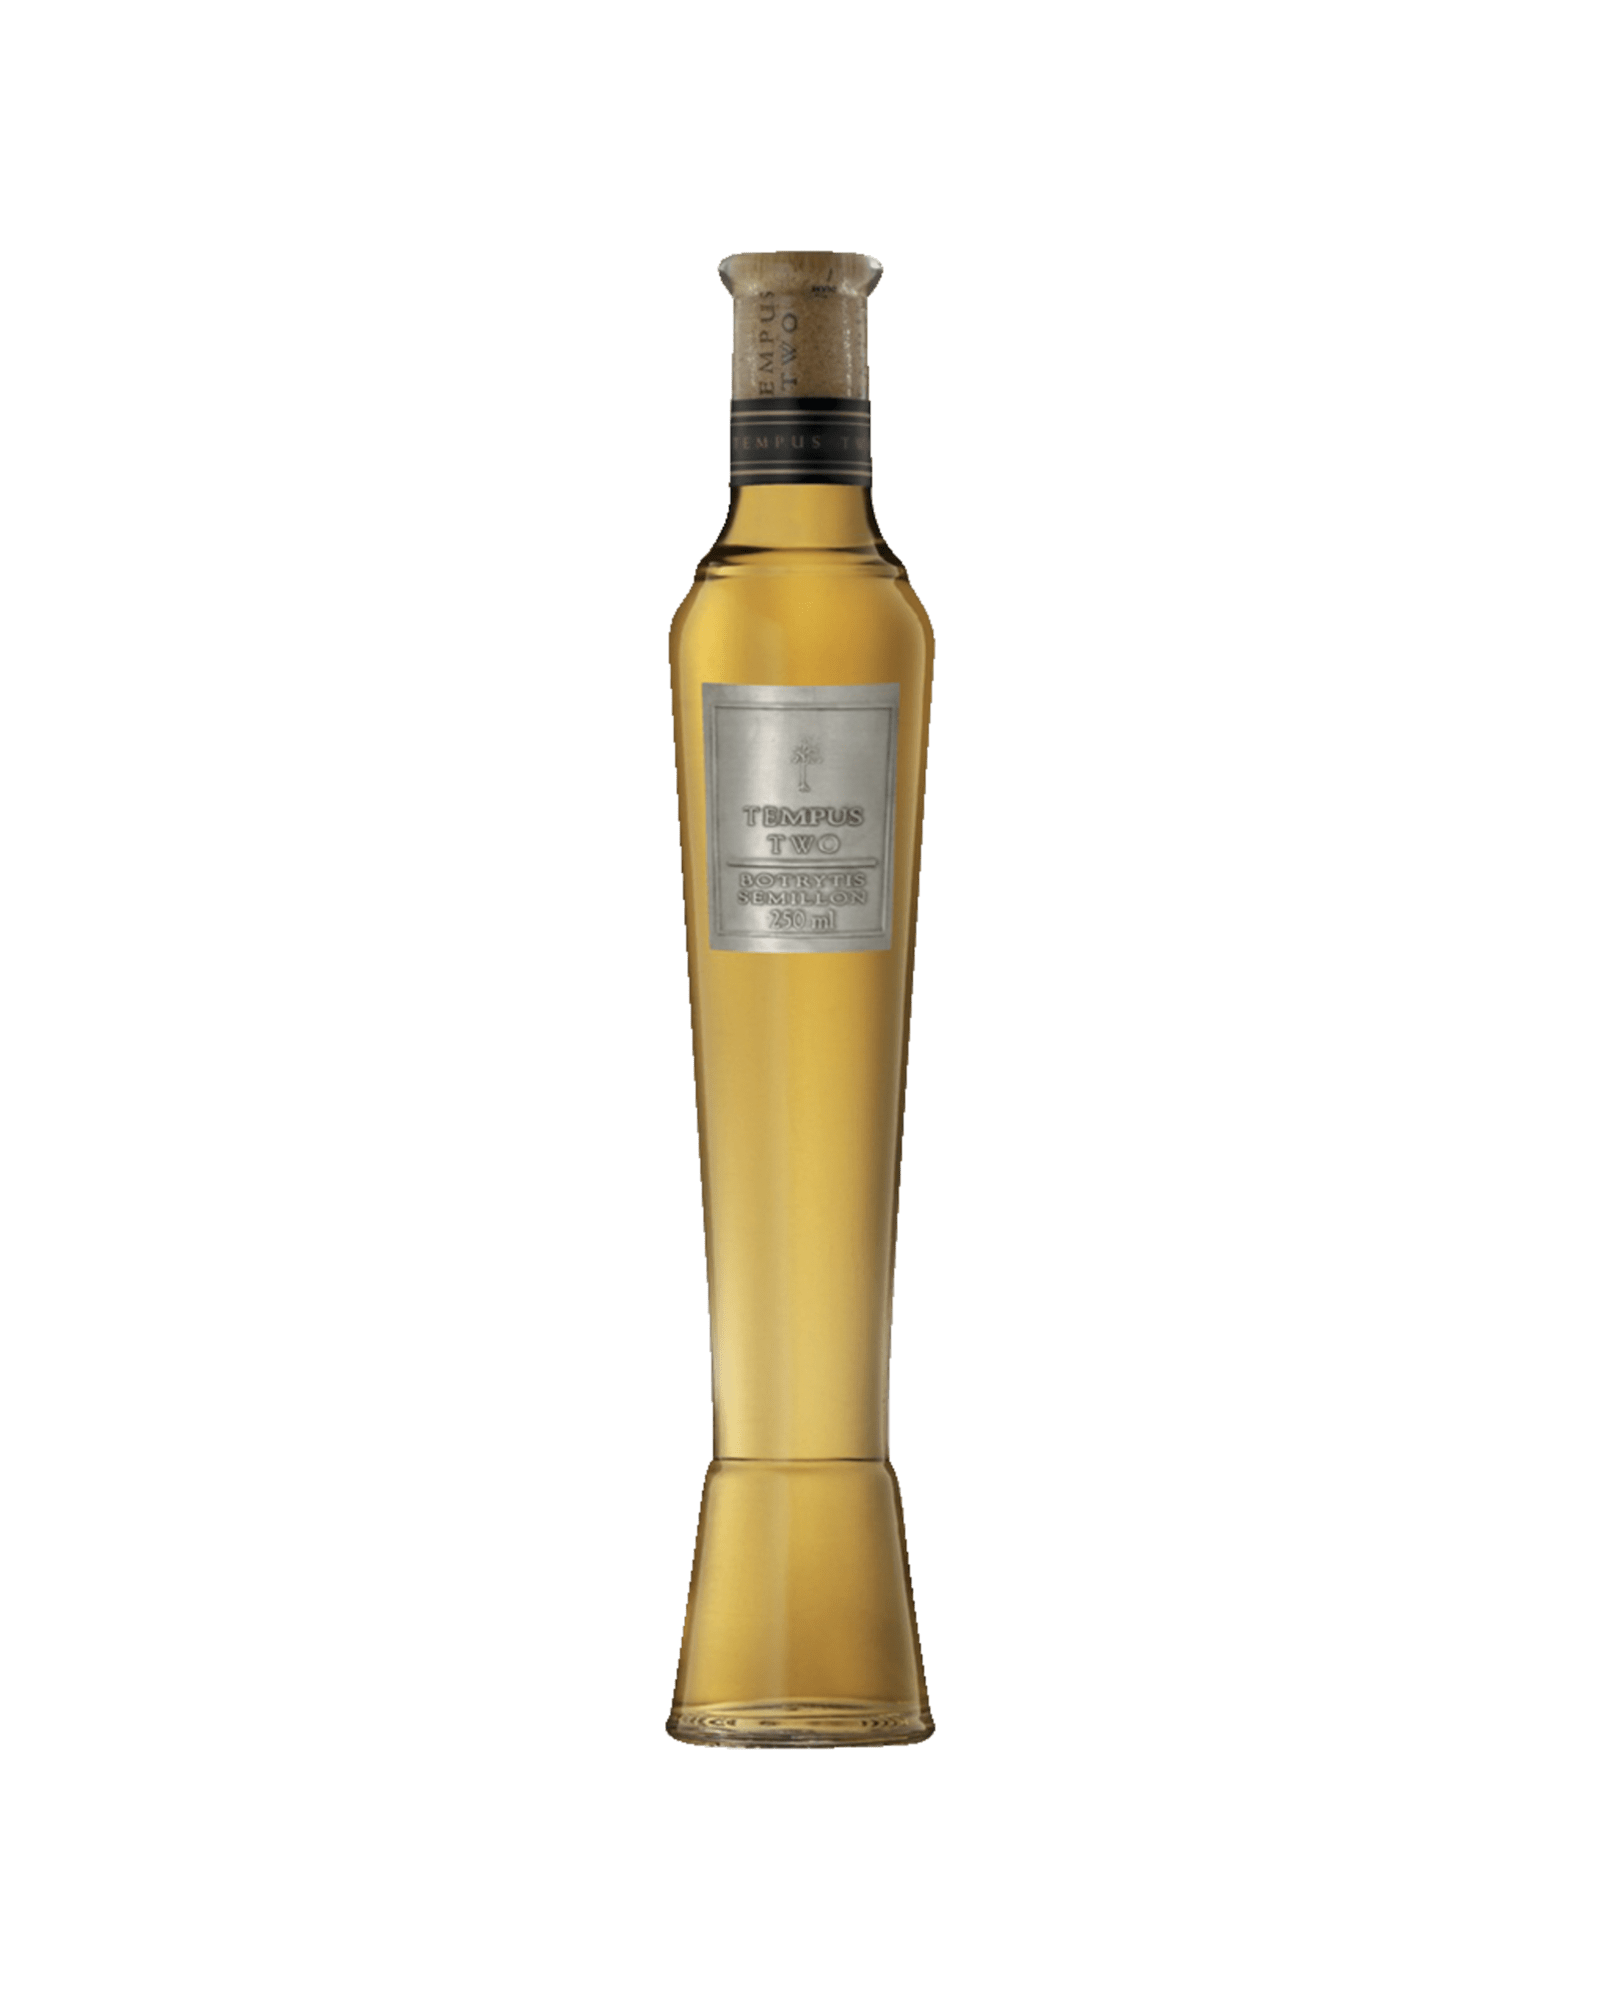 Tempus Two Pewter Botrytis Semillon 2015 Griffith 250ml (1x25cl) - TwoMoreGlasses.com